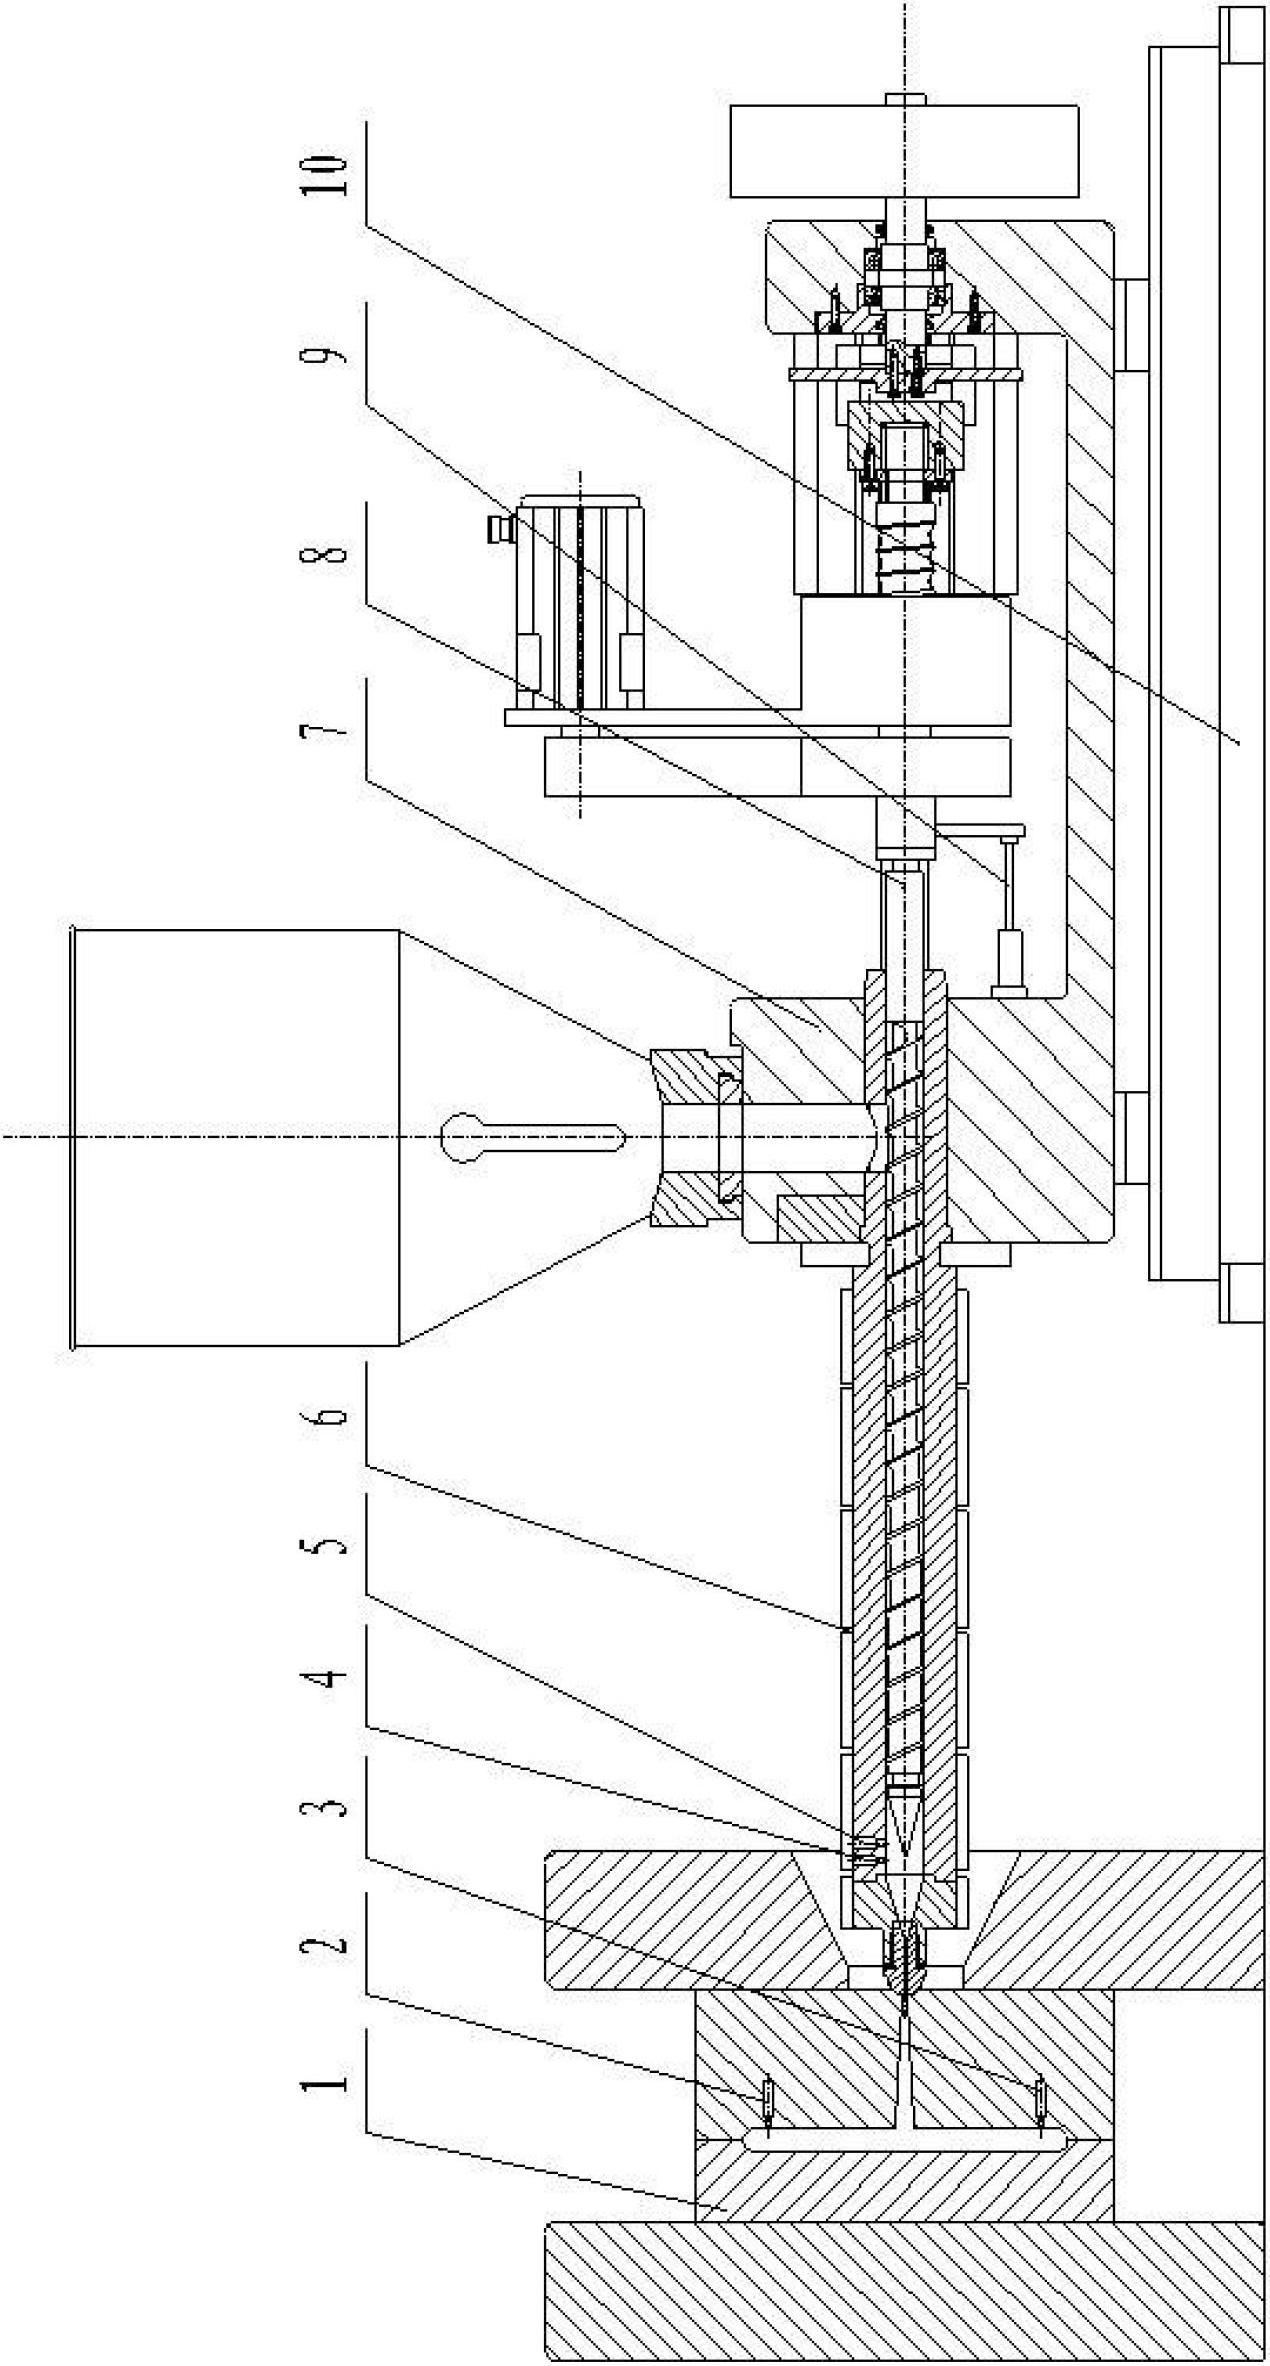 Fully-electric ultra-high speed injection molding PVT (Pressure Volume Temperature) online measurement and control method